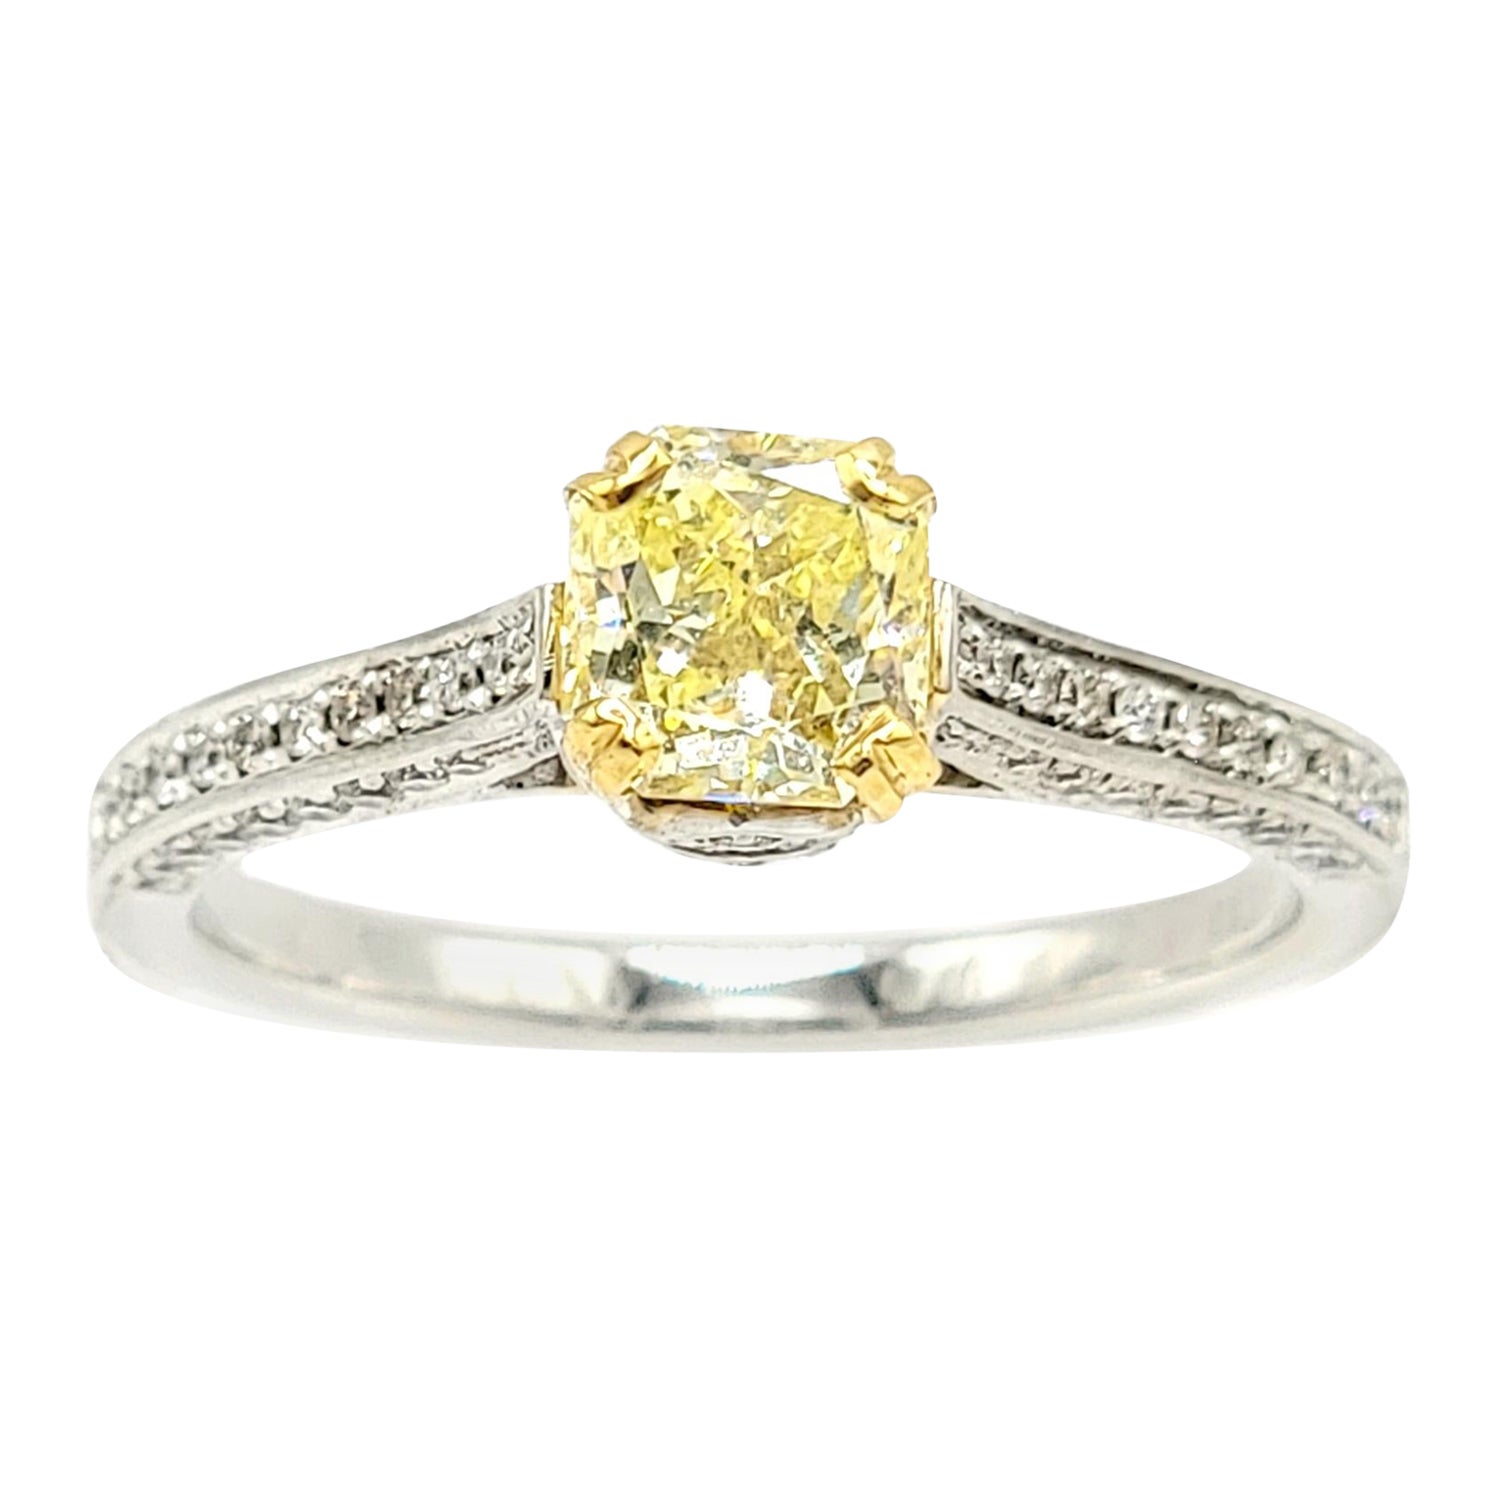 Radiant Cut Fancy Yellow Radiant Diamond Engagement Ring in White Gold